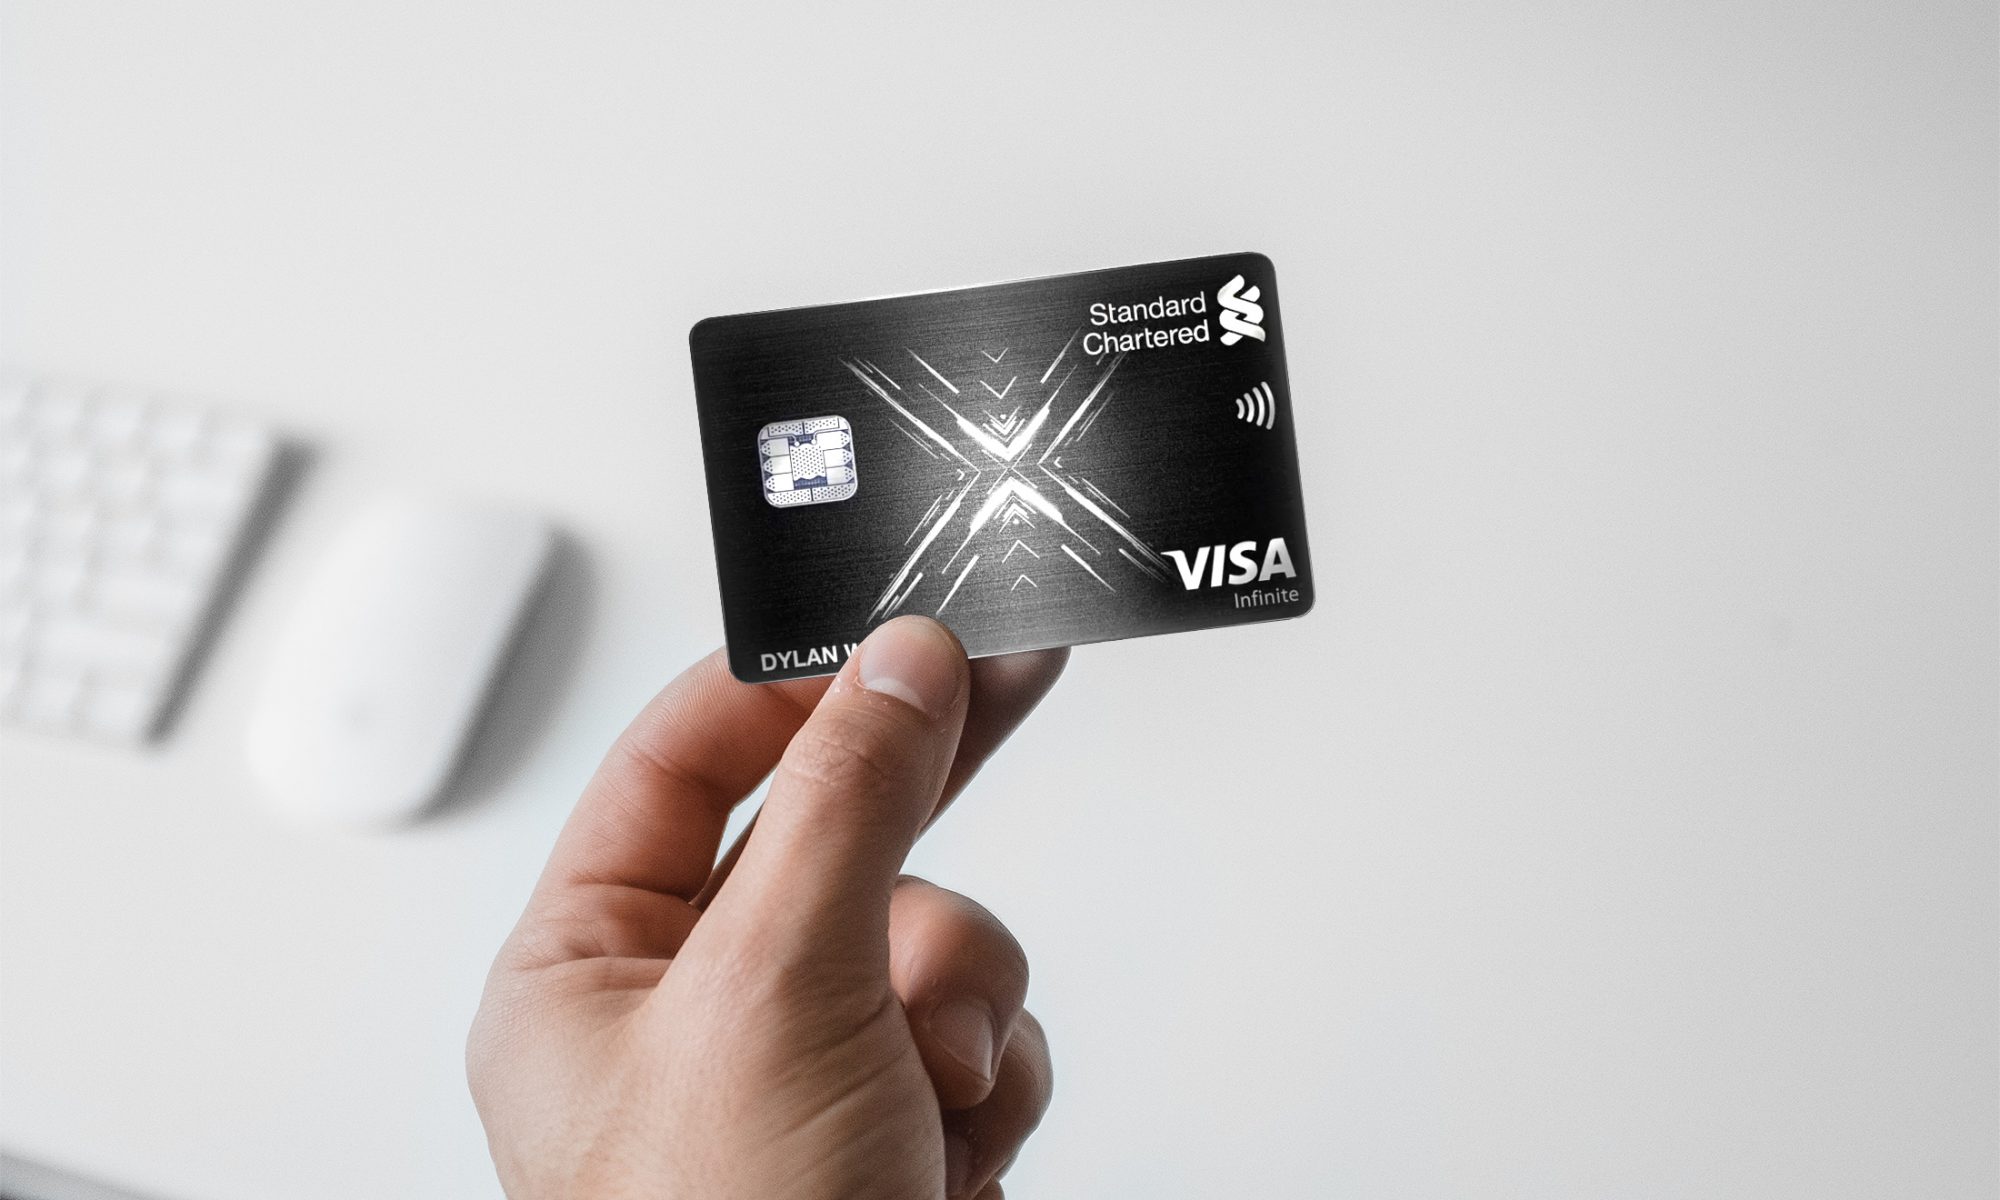 Standard Chartered Credit Card Promotion 2020 malaytata